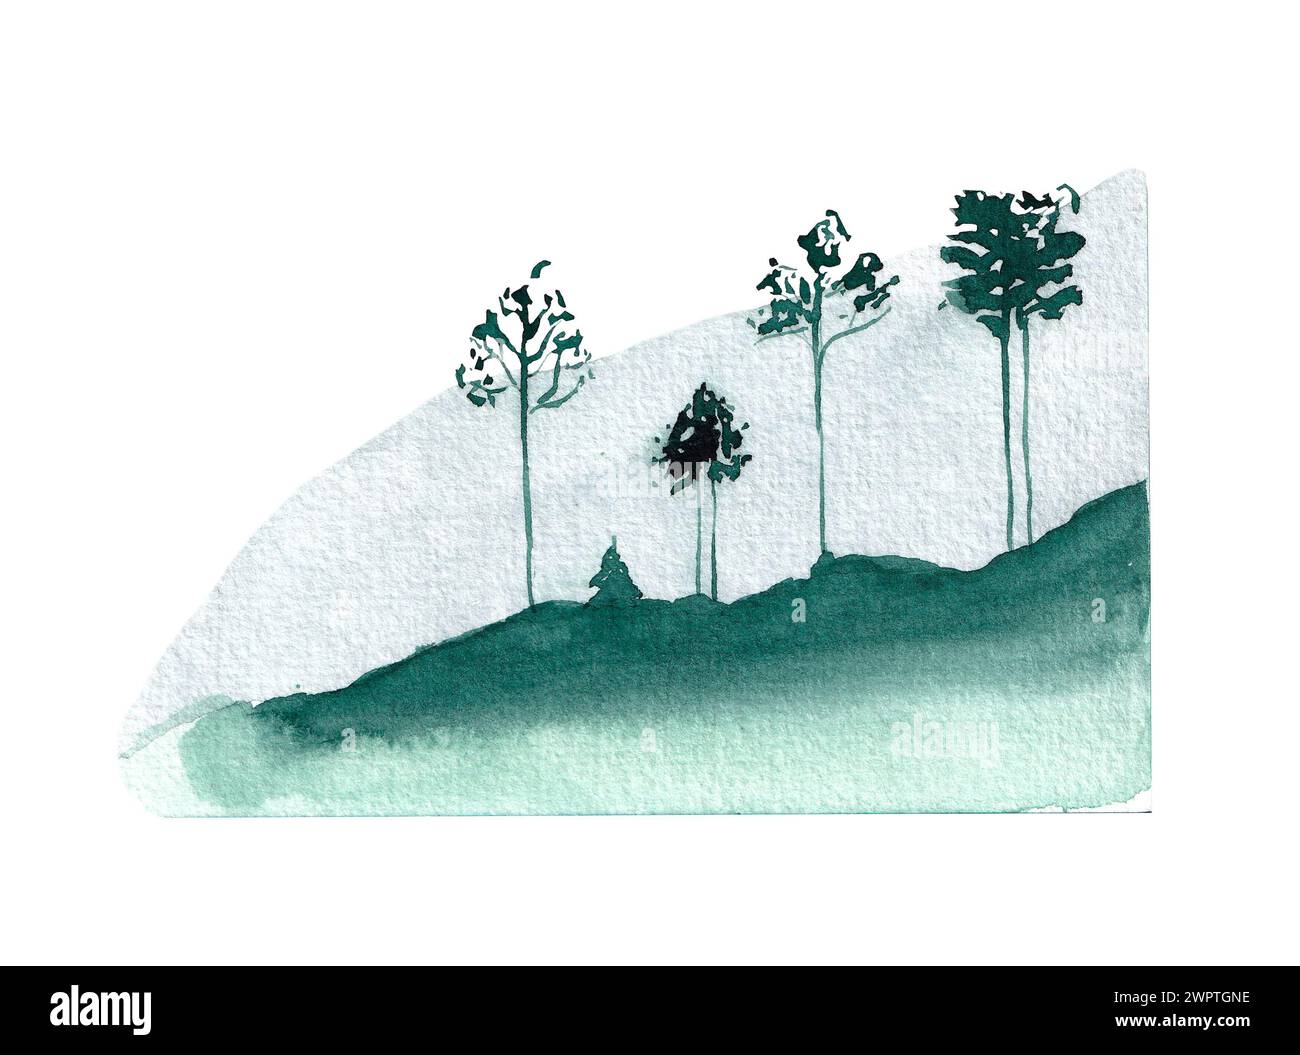 Watercolor hand drawn landscape. Silhouette of trees. Stock Photo